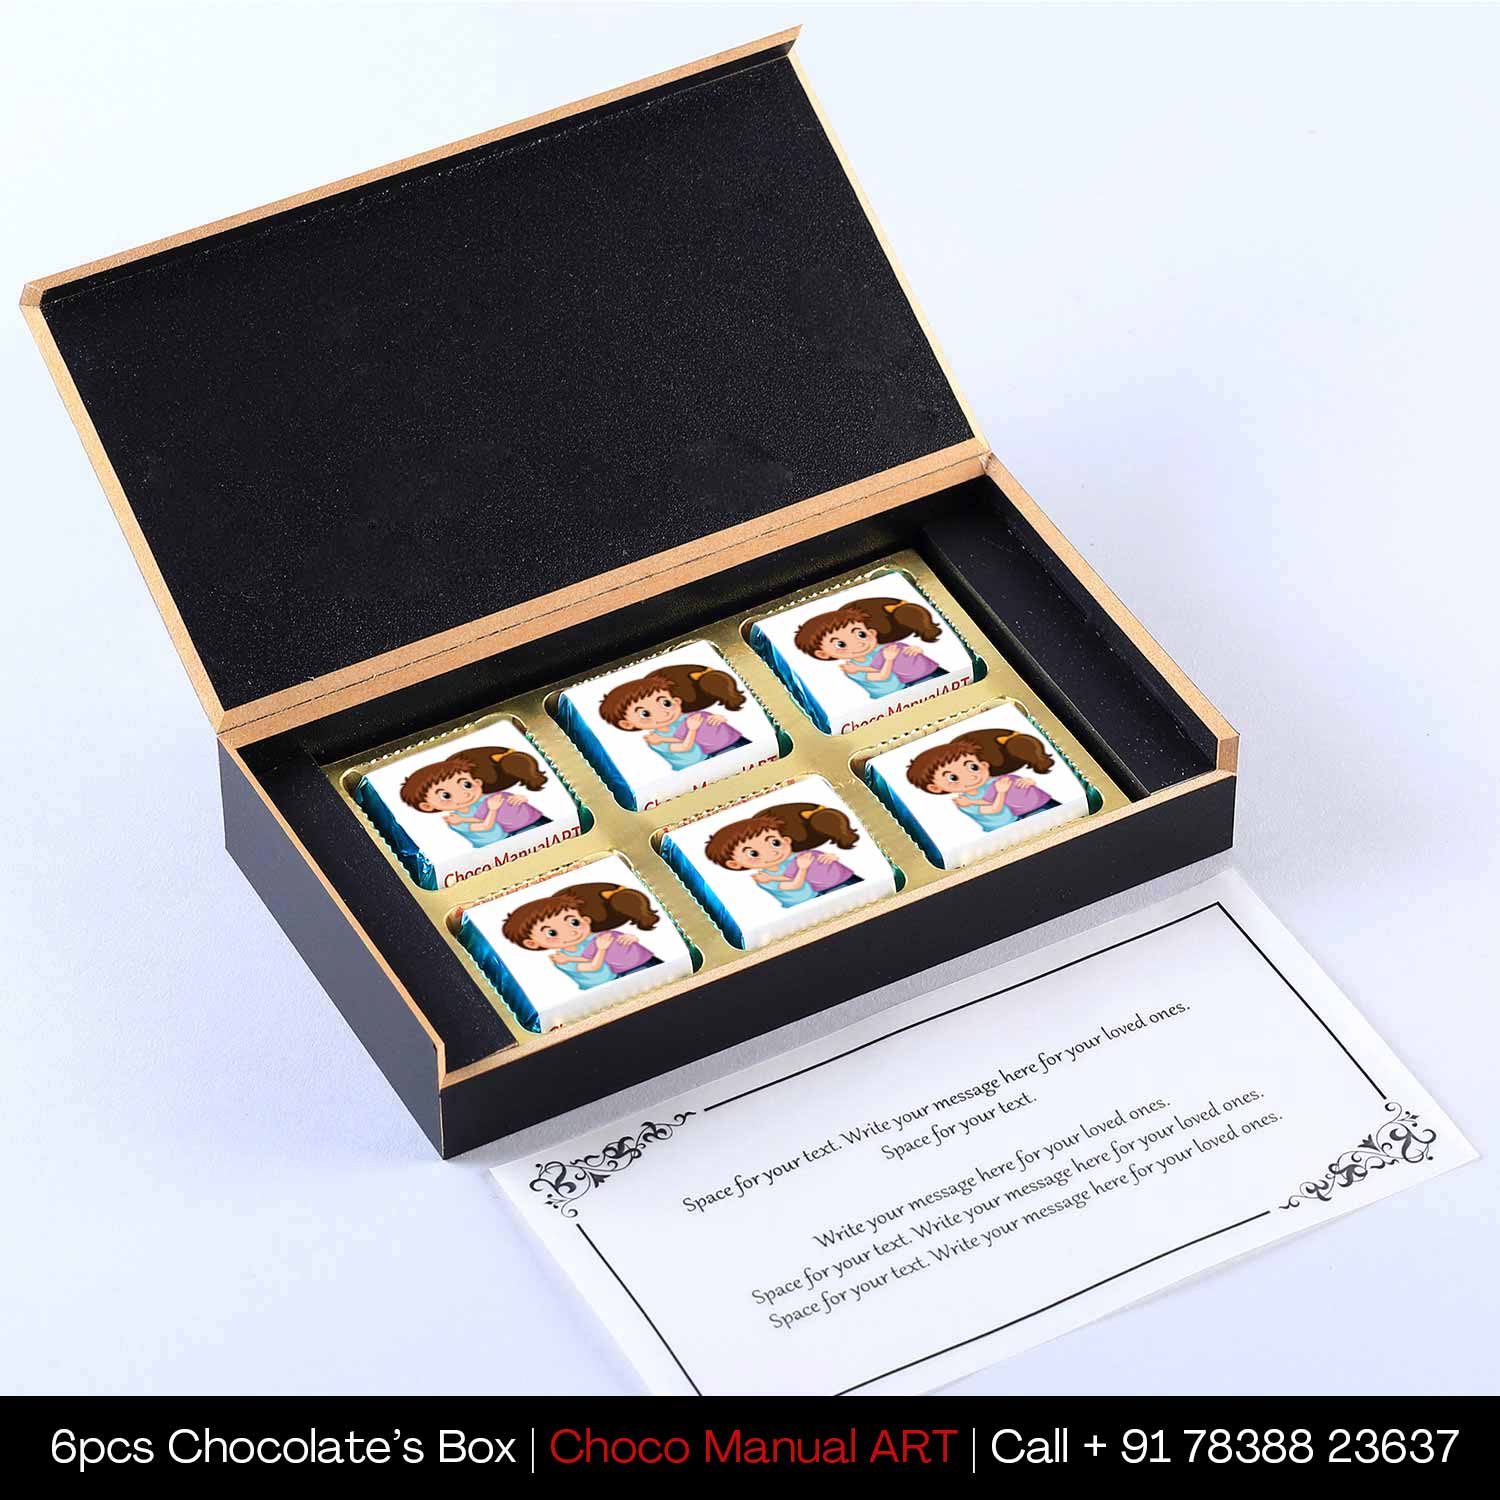 Buy Customised Sorry Chocolate Box with personalized Message on it wooden packaging I Free shipping across India